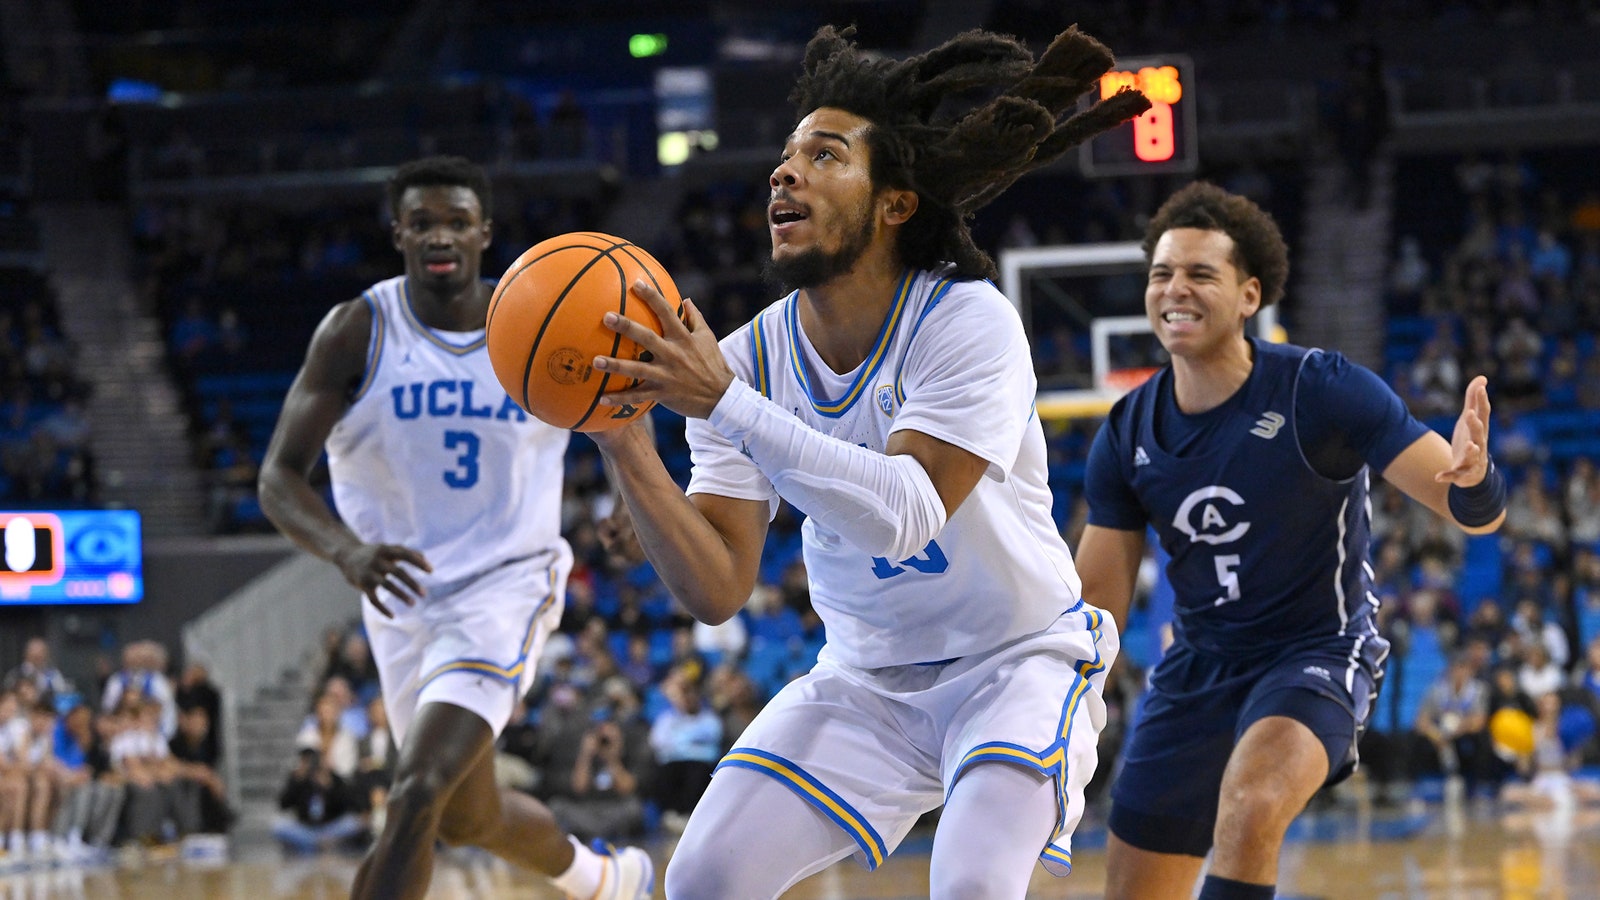 UCLA's Tyger Campbell a top playmaker